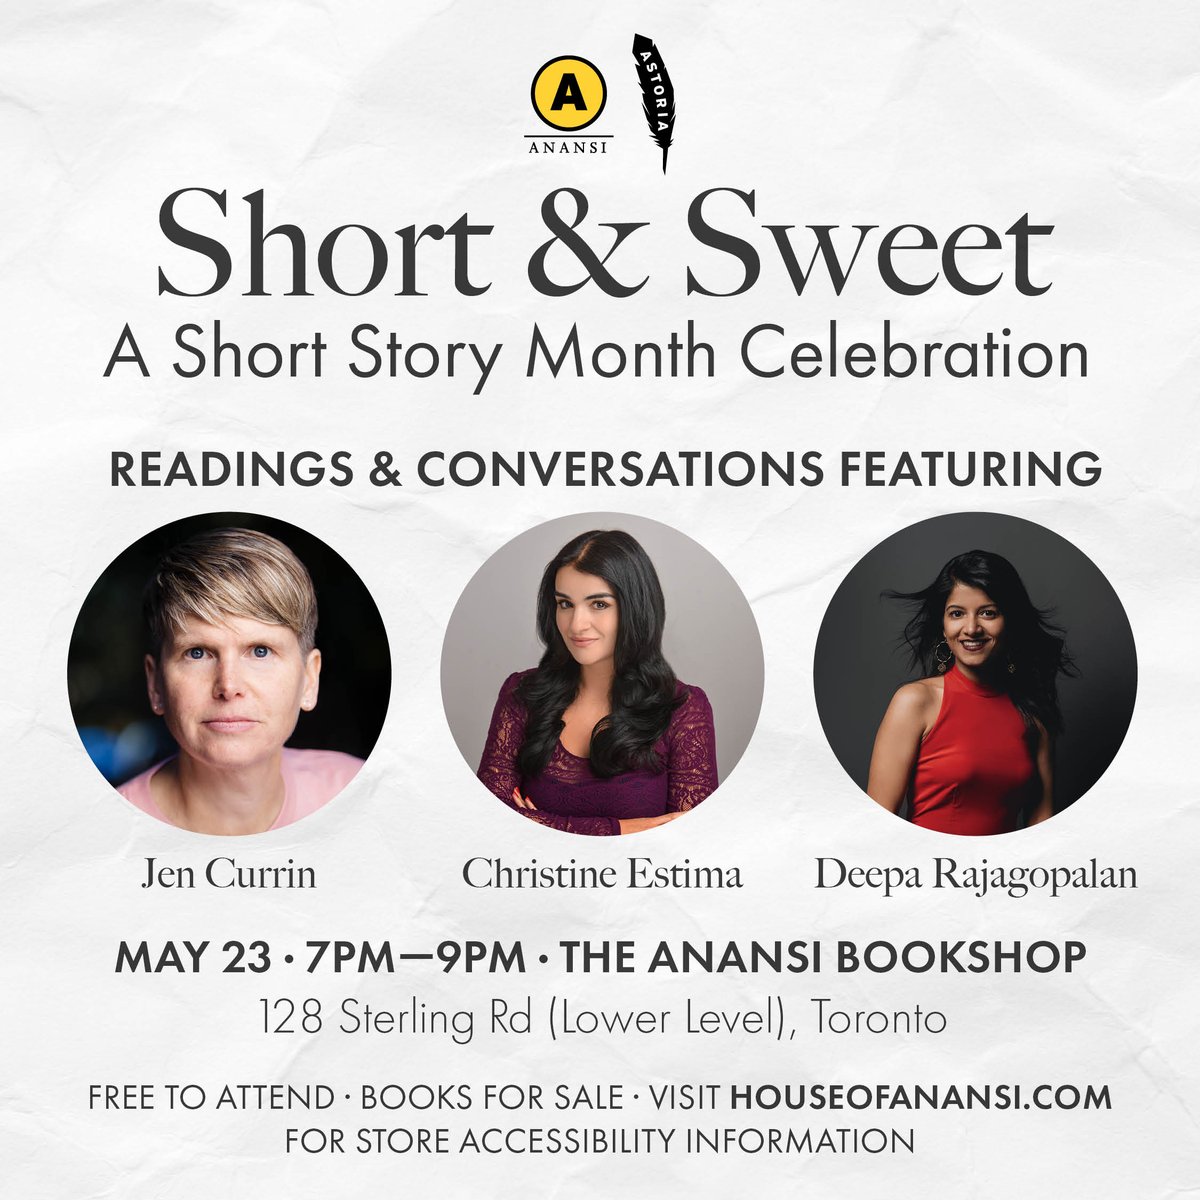 Happy #ShortStoryMonth! 📚💛 Join us for a sweet celebration of our new short story collections on May 23rd at the Anansi bookshop! From 7pm to 9pm ET we'll be hosting readings and chats with three incredible short story authors.